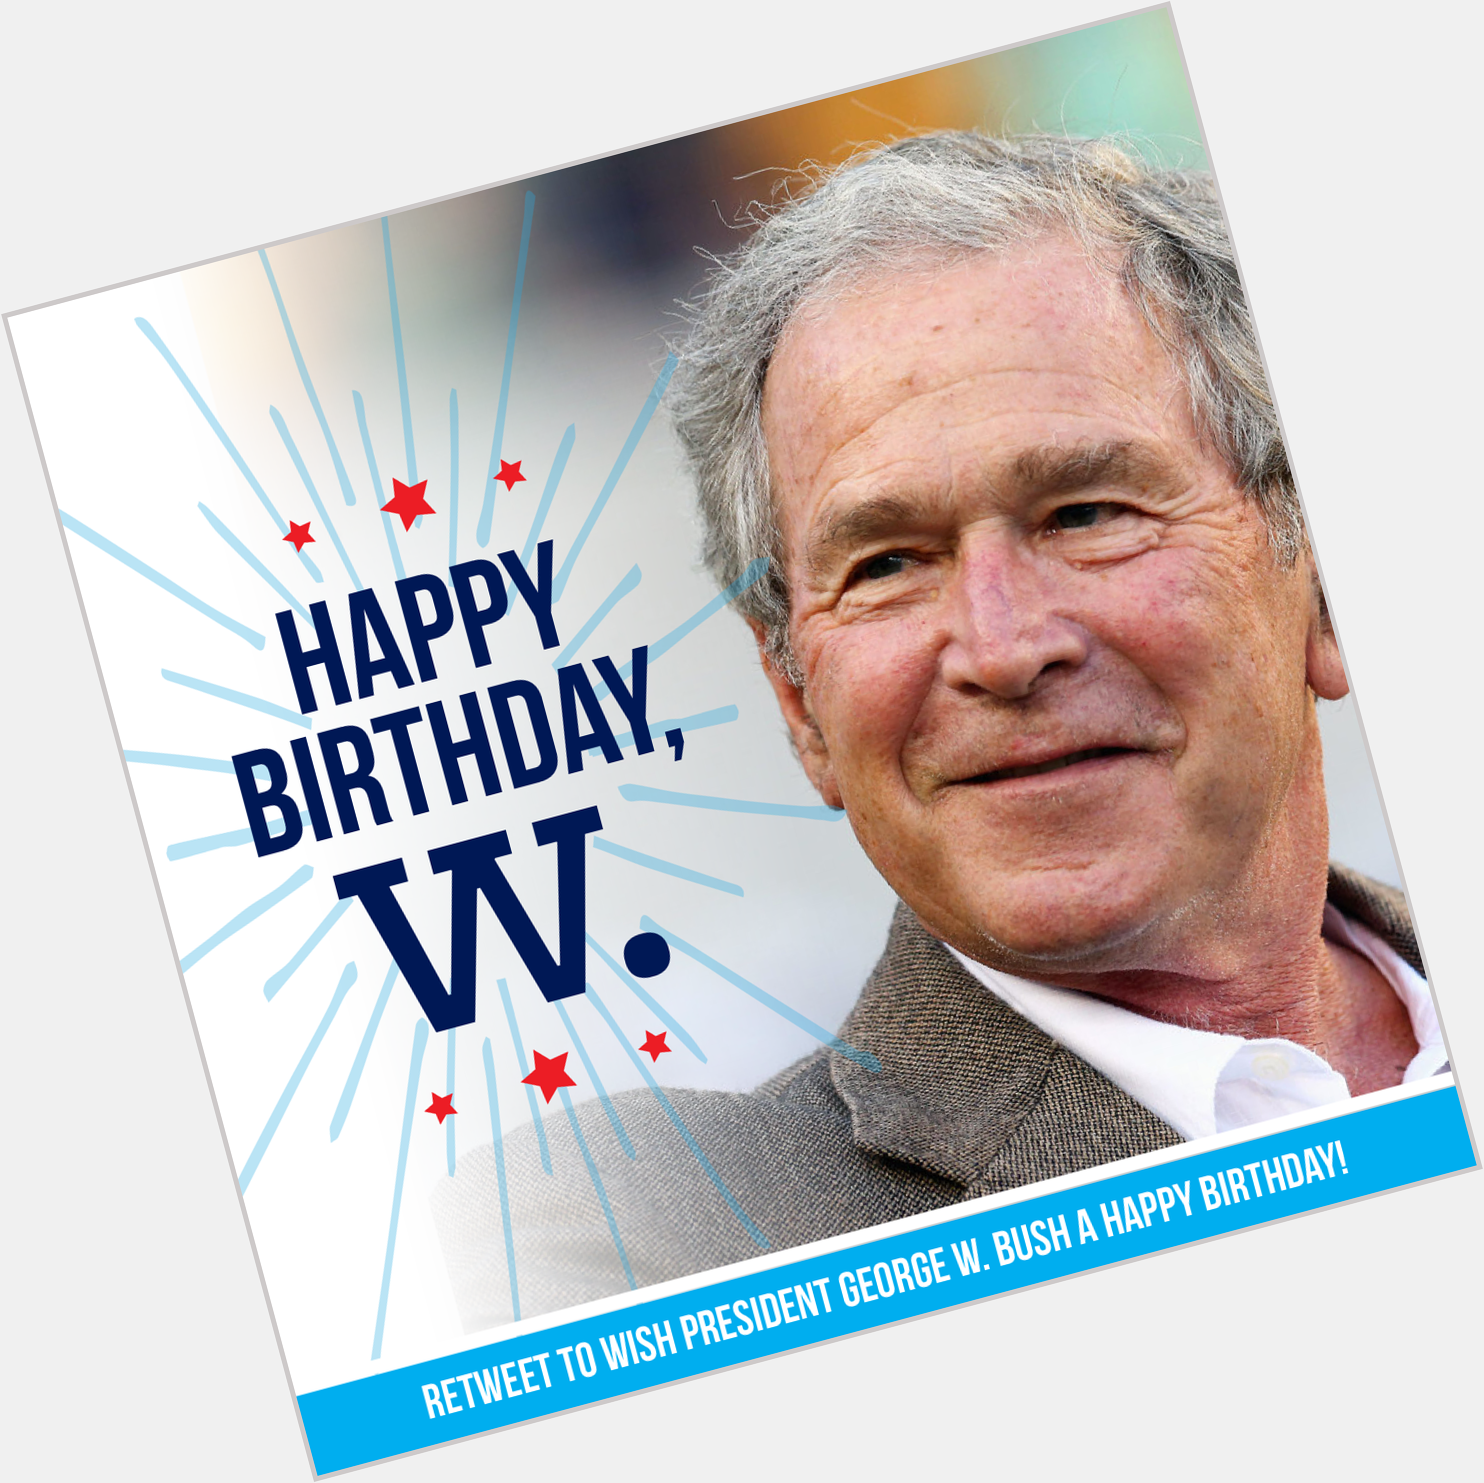 Join us in wishing President George W. Bush a very happy birthday! Thank you for your service and leadership! 